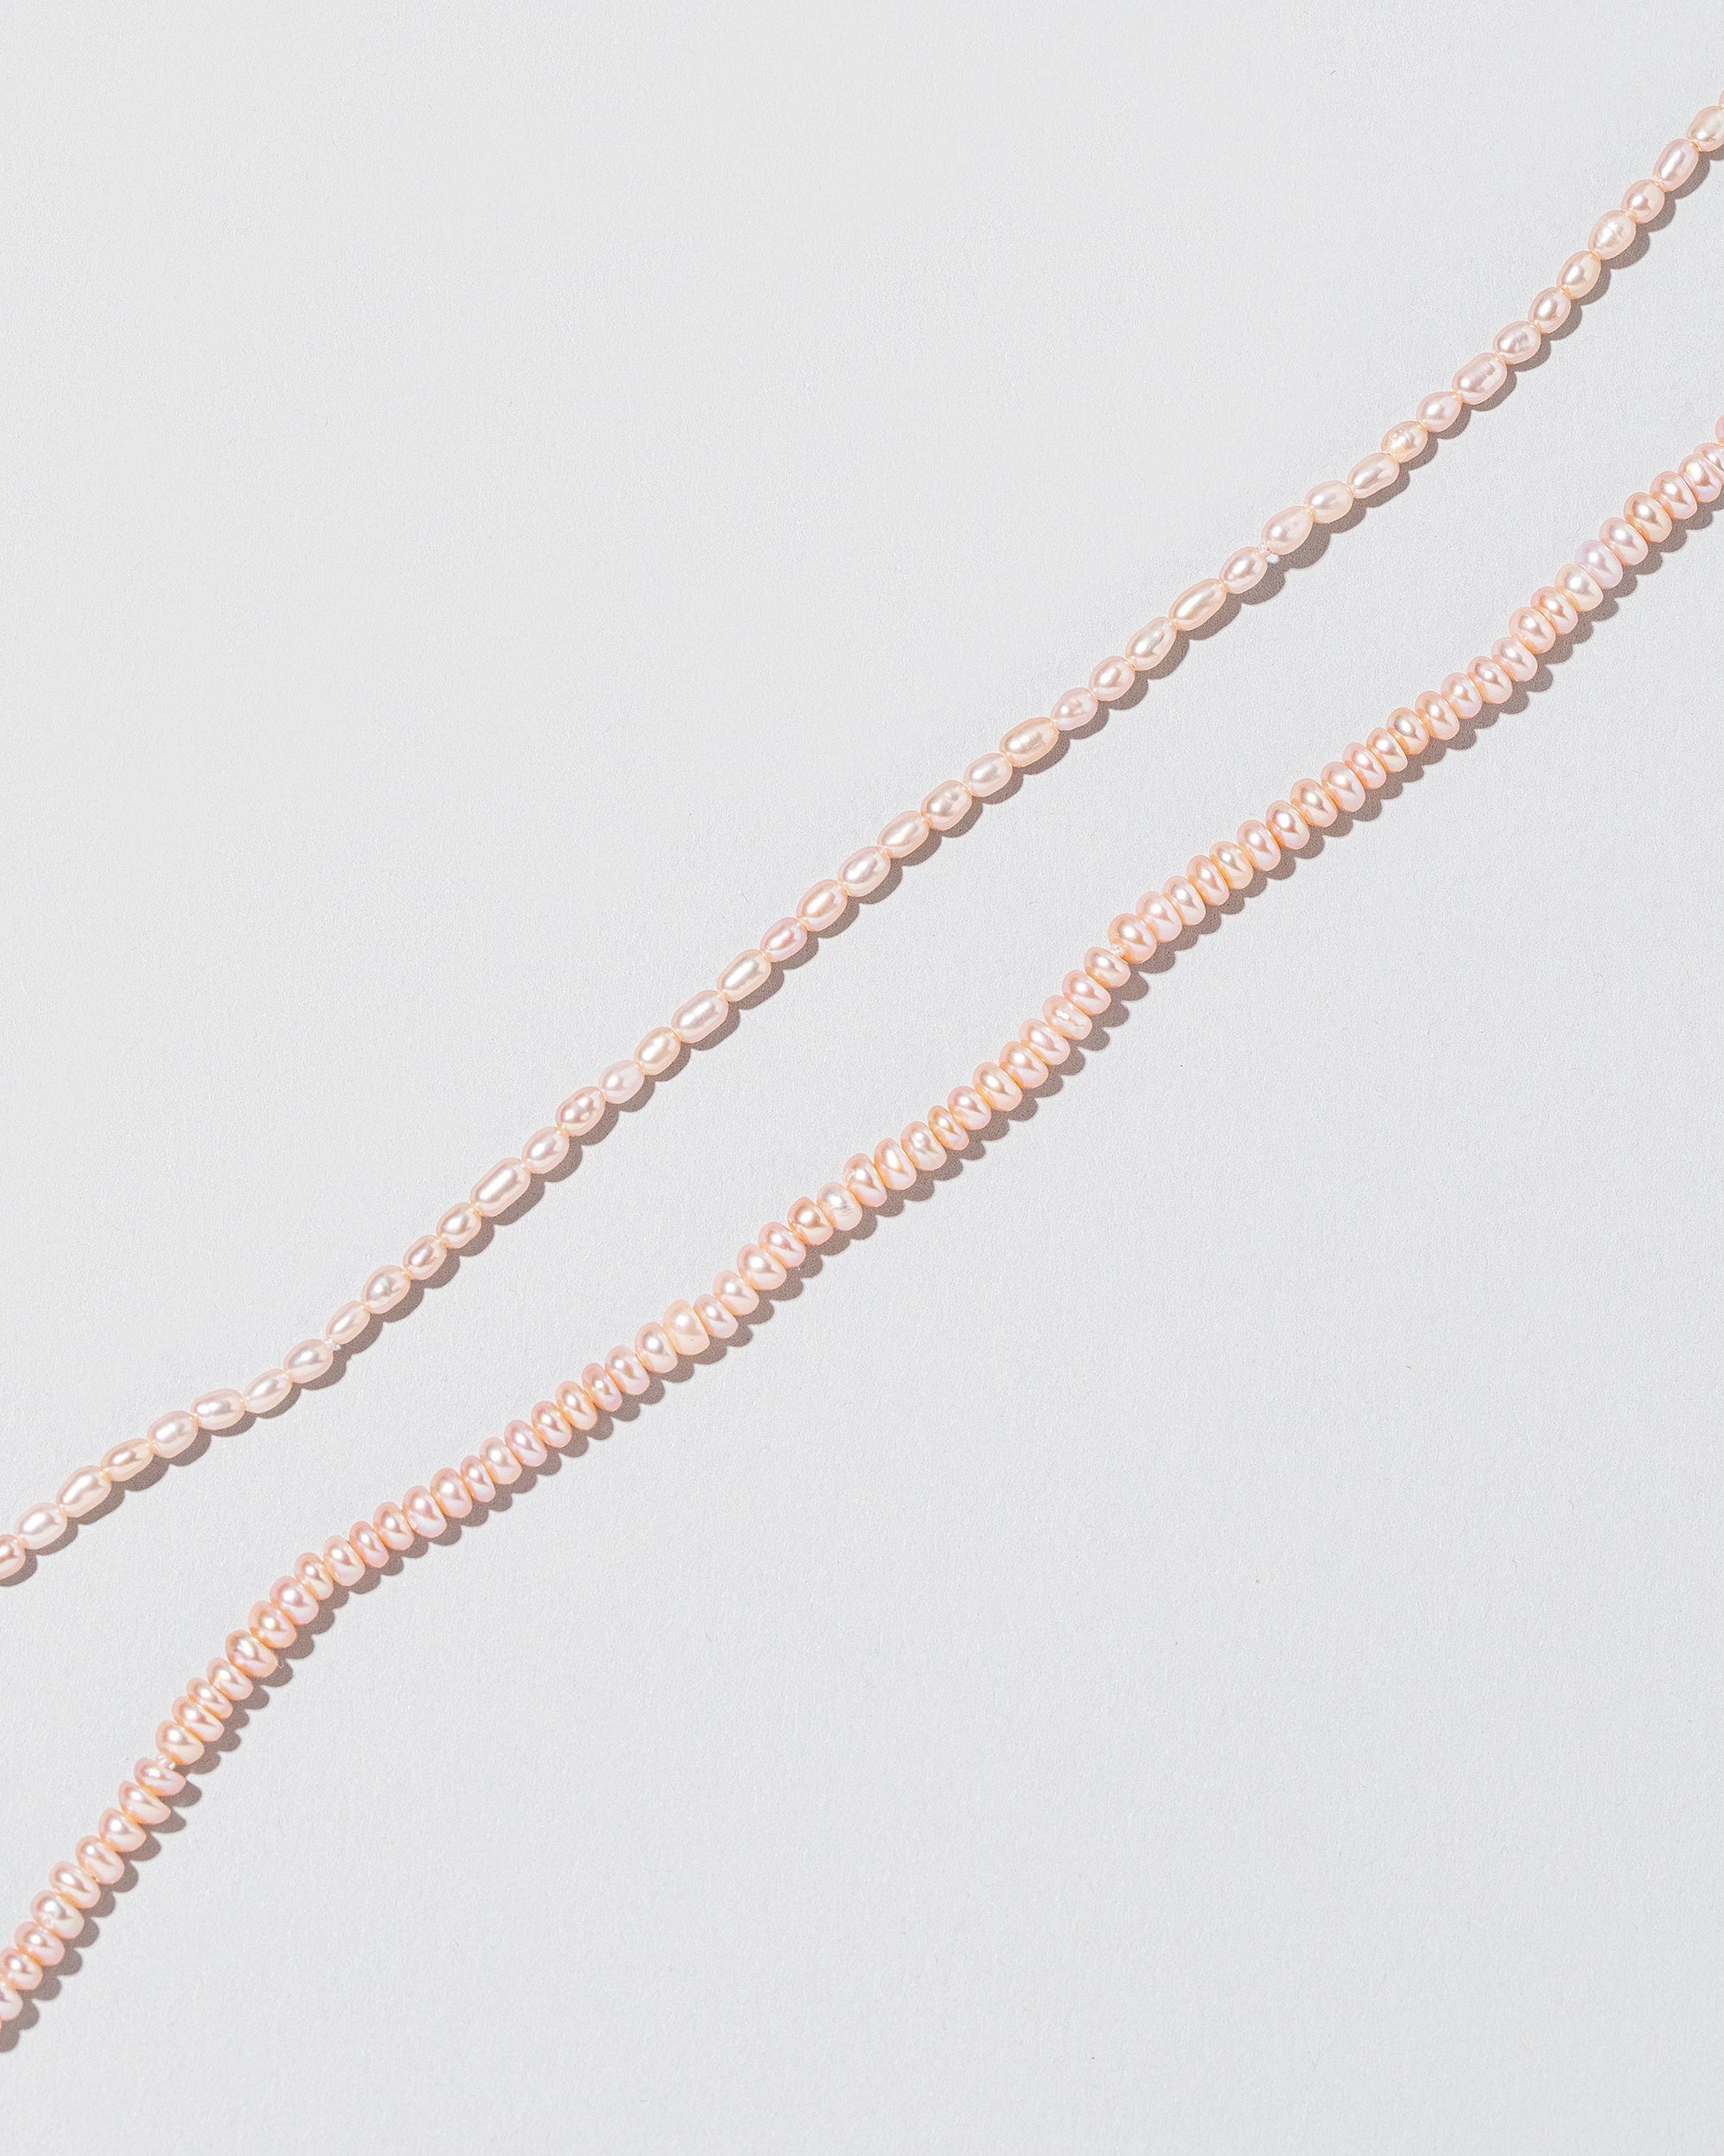  Seed Pearl Choker on light color background.